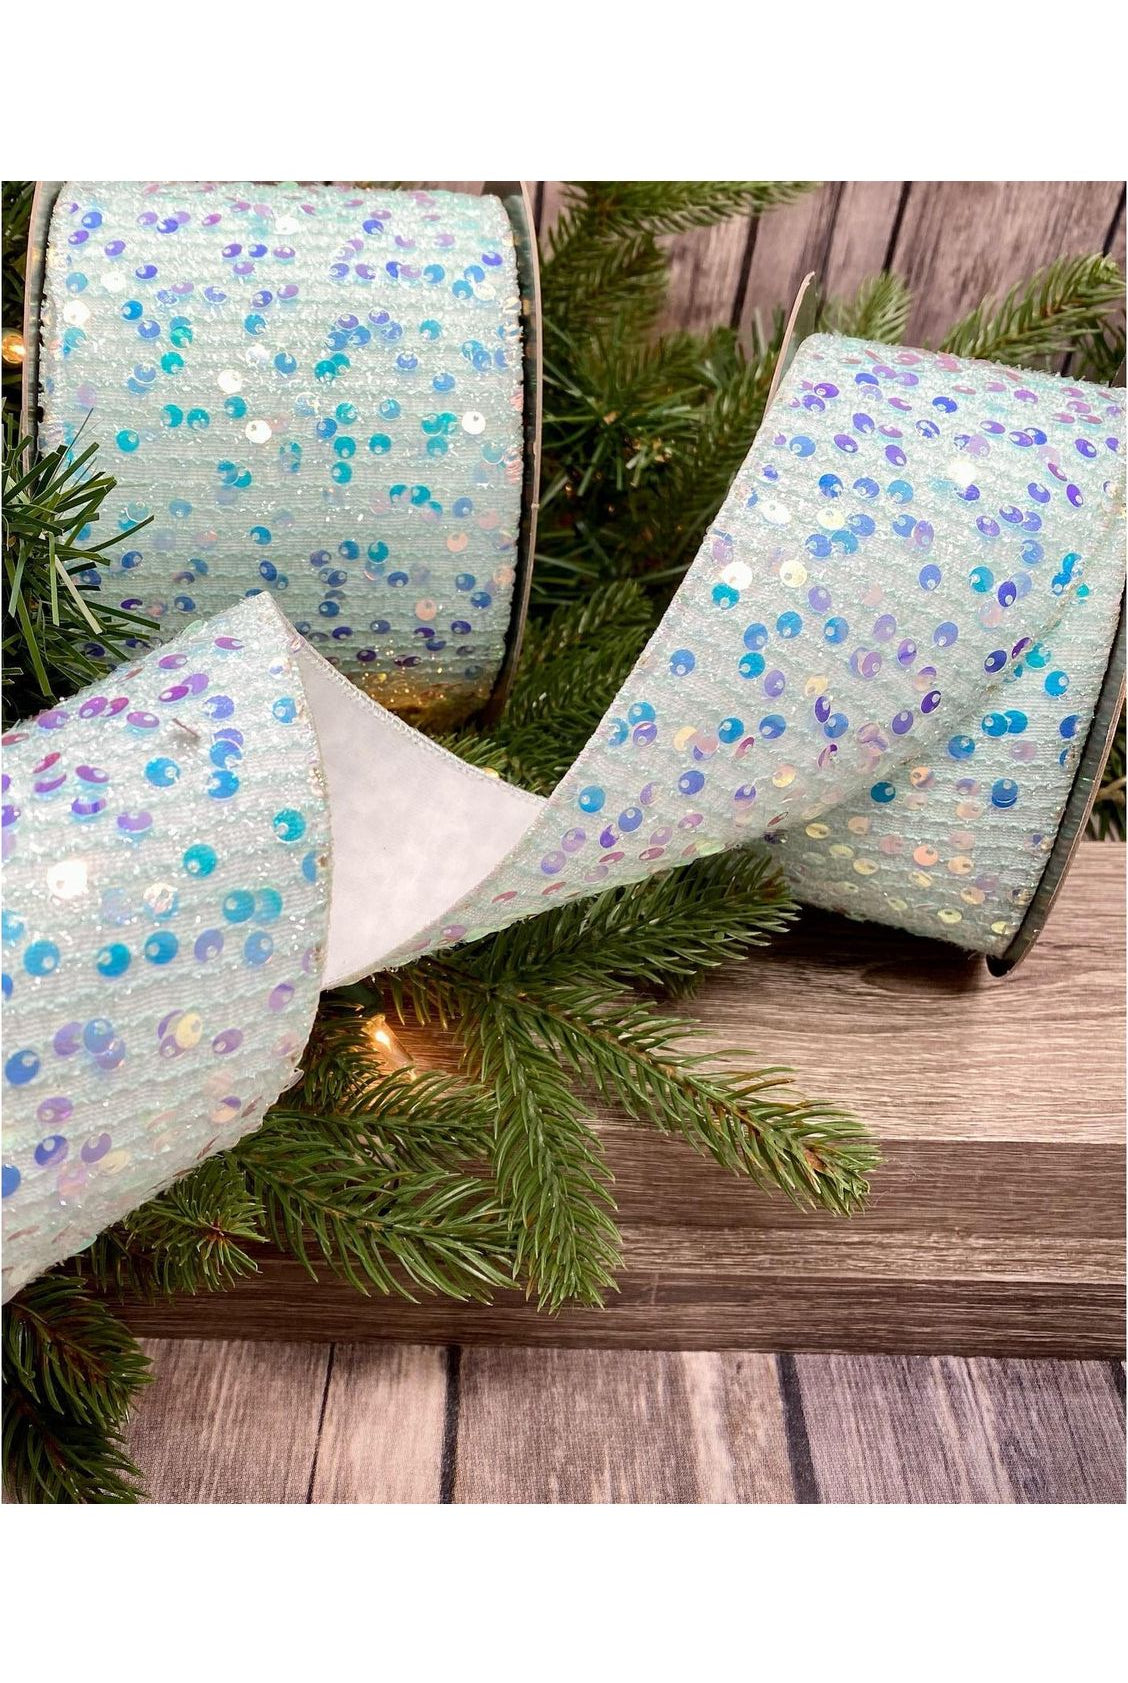 Shop For 2.5" Sequin Tinsel Ribbon: White (10 Yards) 09-4015